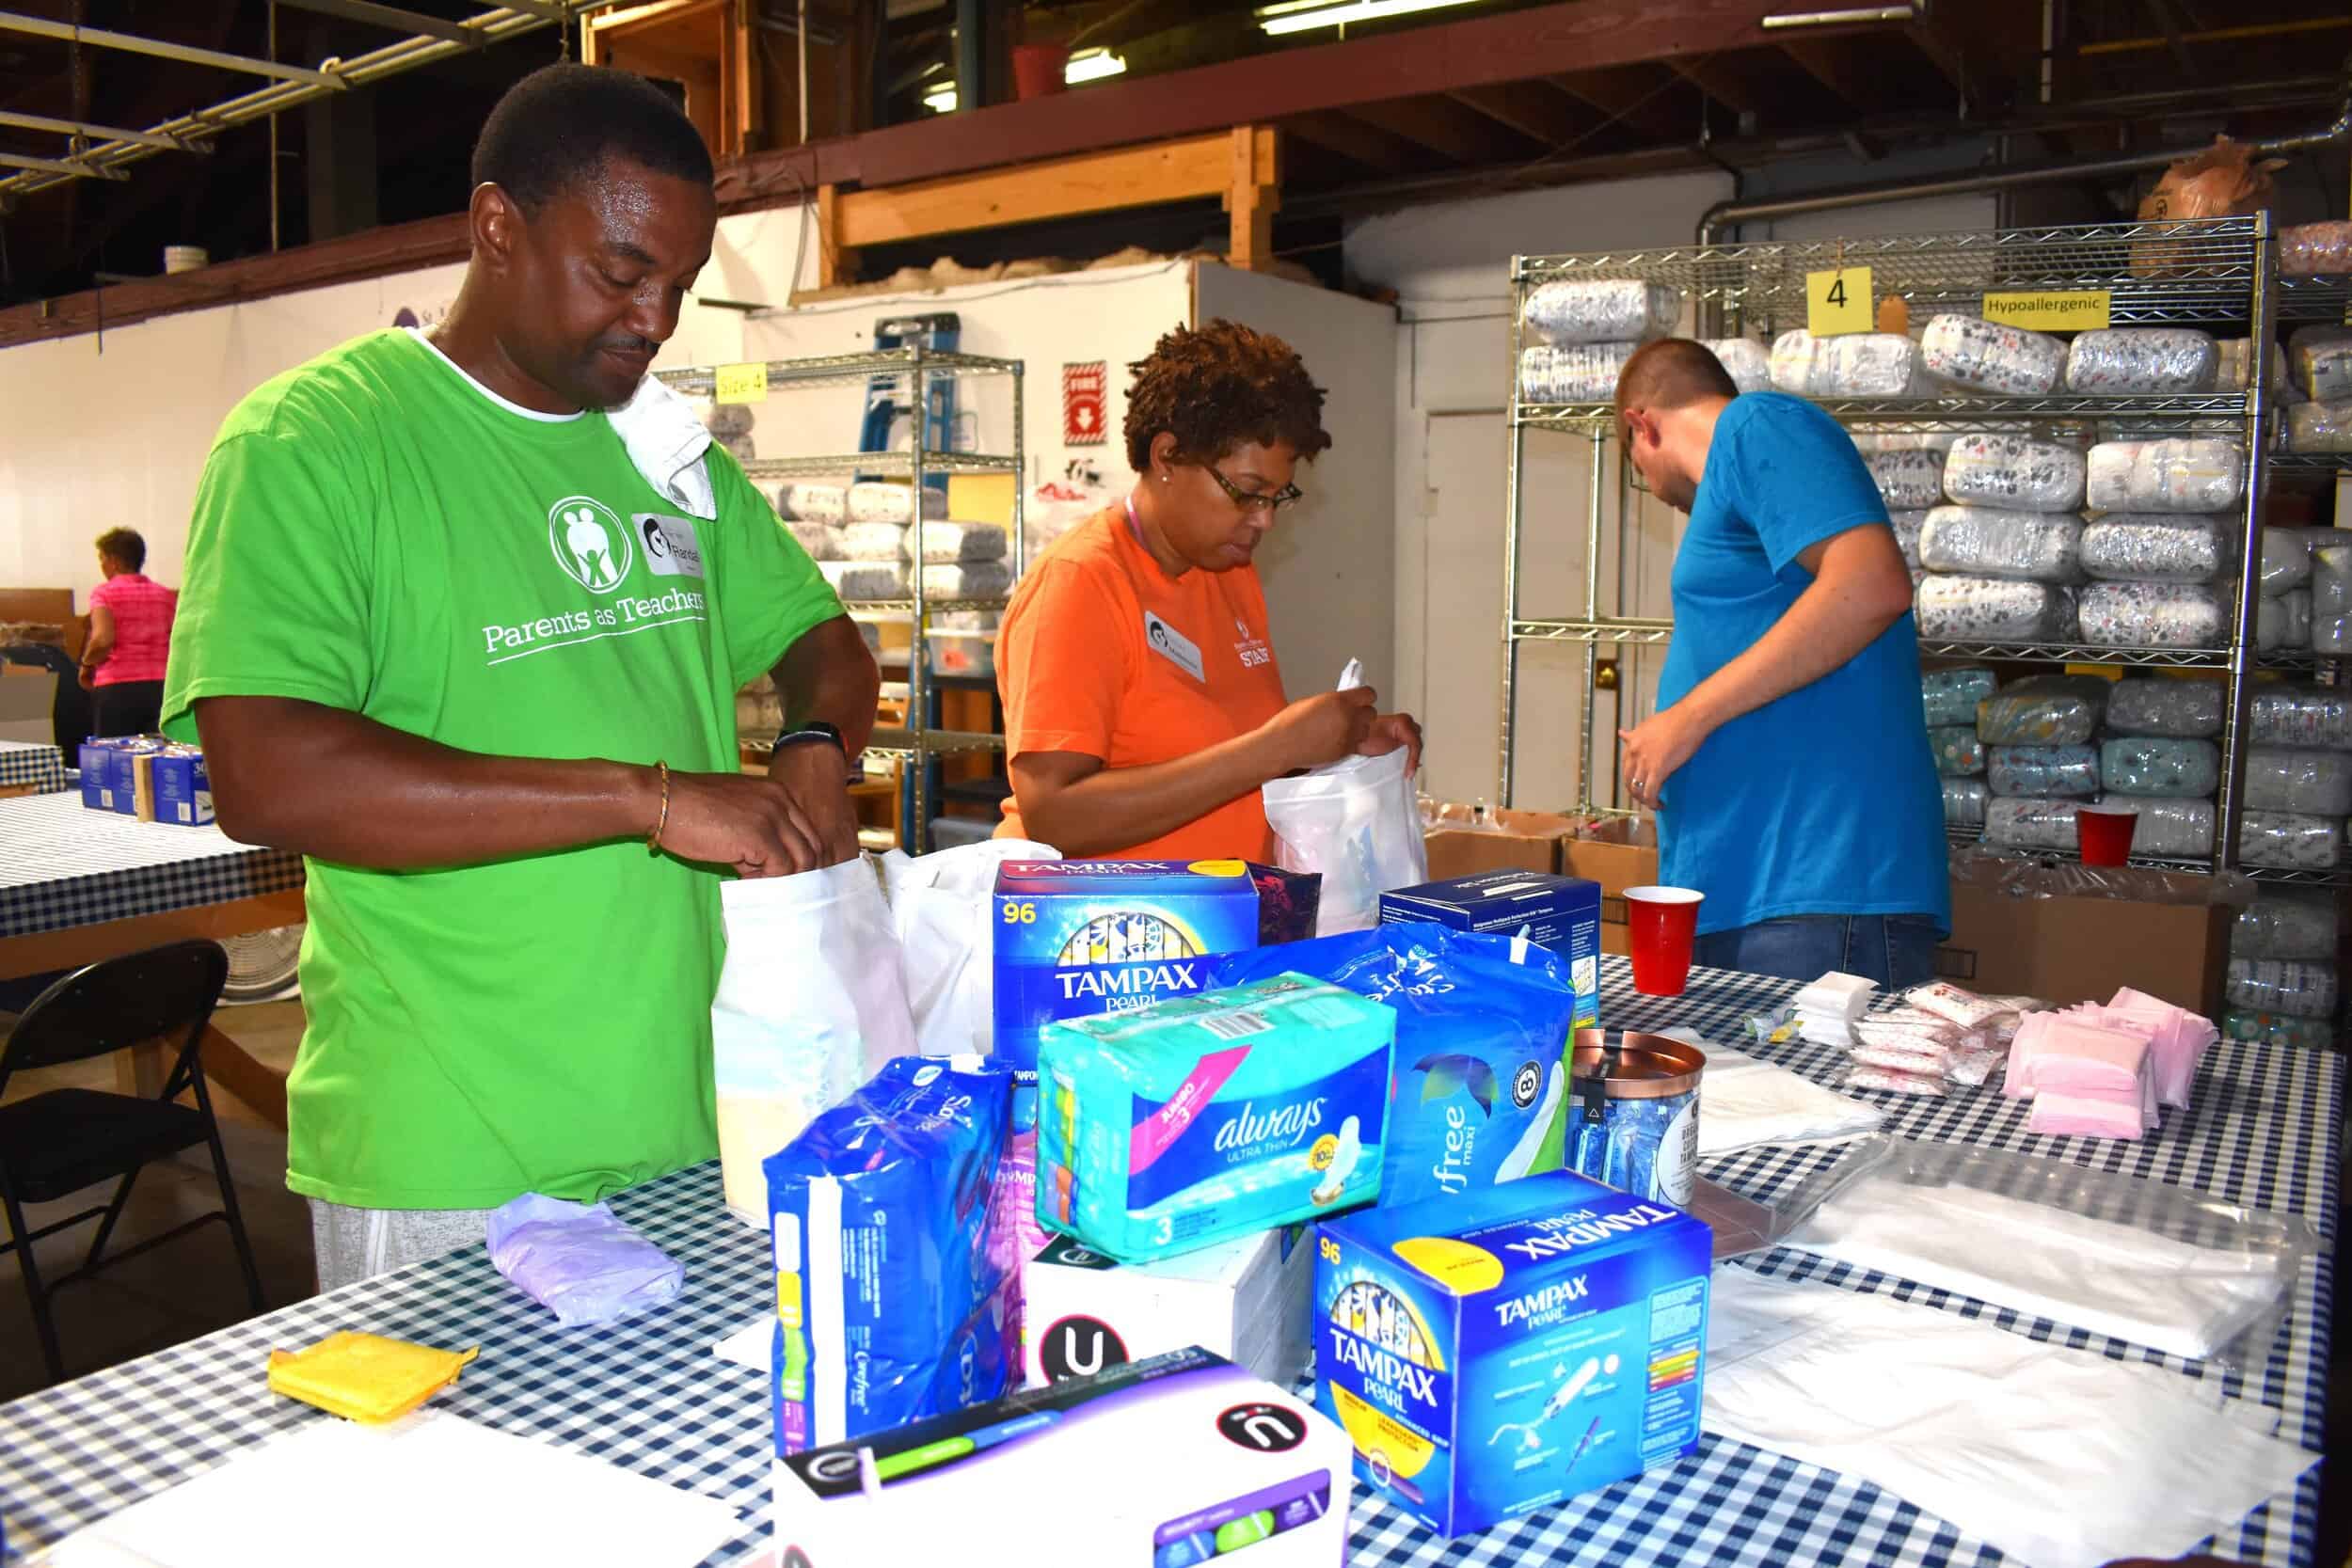 Parents as Teachers staffers Randall Hinton, Madeliene Brice, and Rick Evers prepare feminine hygiene product kits for distribution to area low-income women at the St. Louis Diaper Bank as part of PAT’s giving back to the community initiative on the…